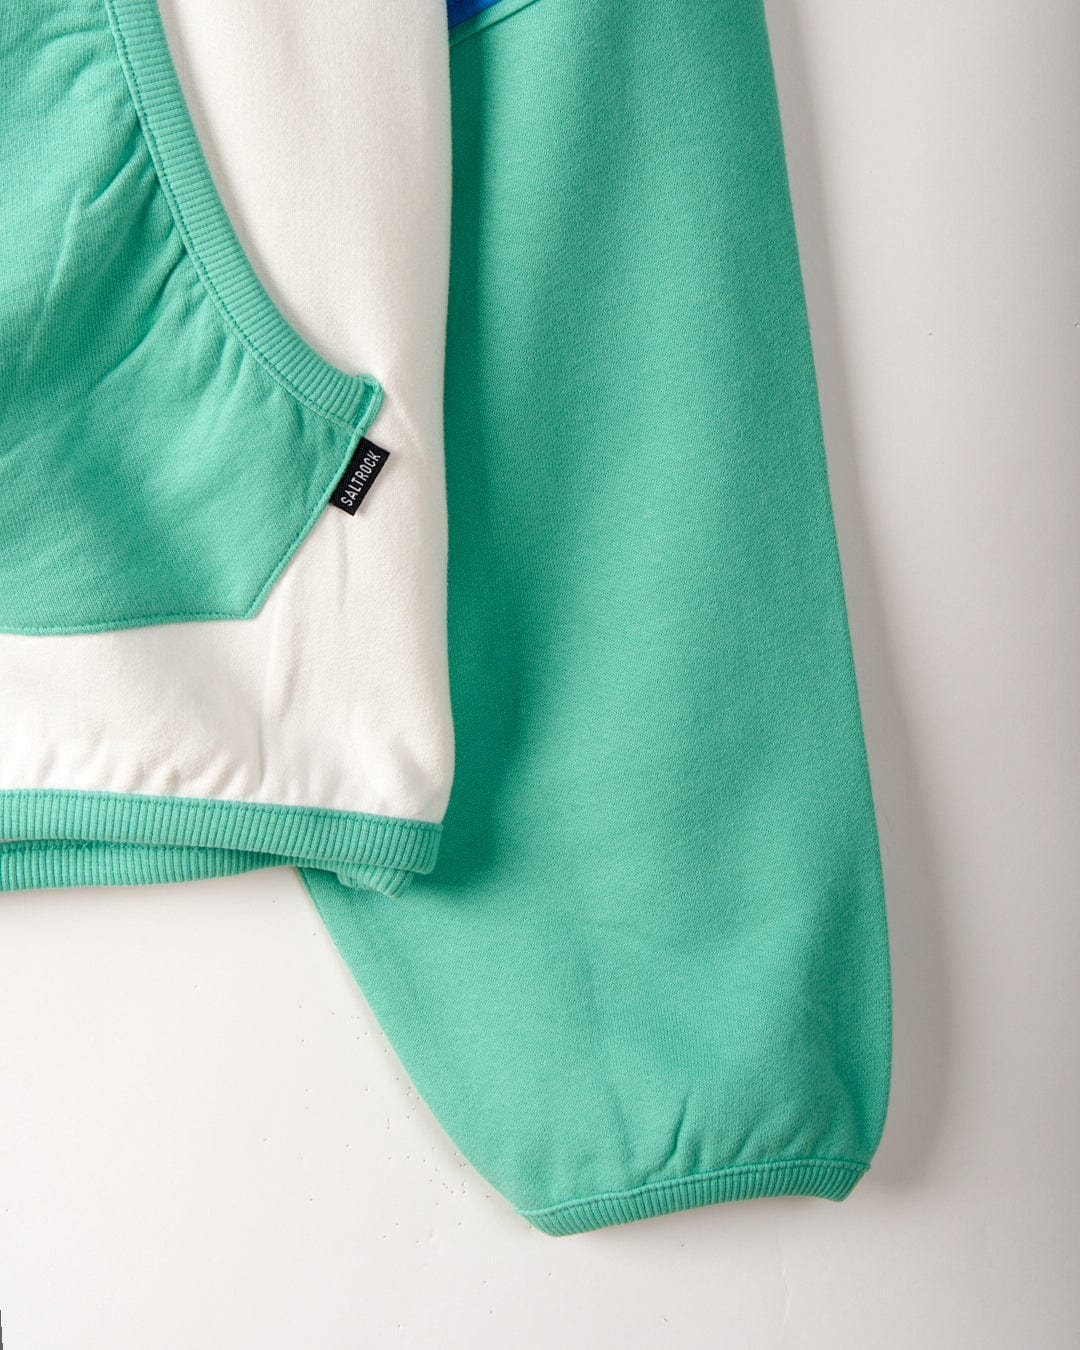 Close-up of a garment showcasing a section of a green and white hoodie with Saltrock Geo Beach - Womens Pop Hoodie - White graphics, featuring a pocket, ribbed cuff, and a small tag that reads "Sinner.